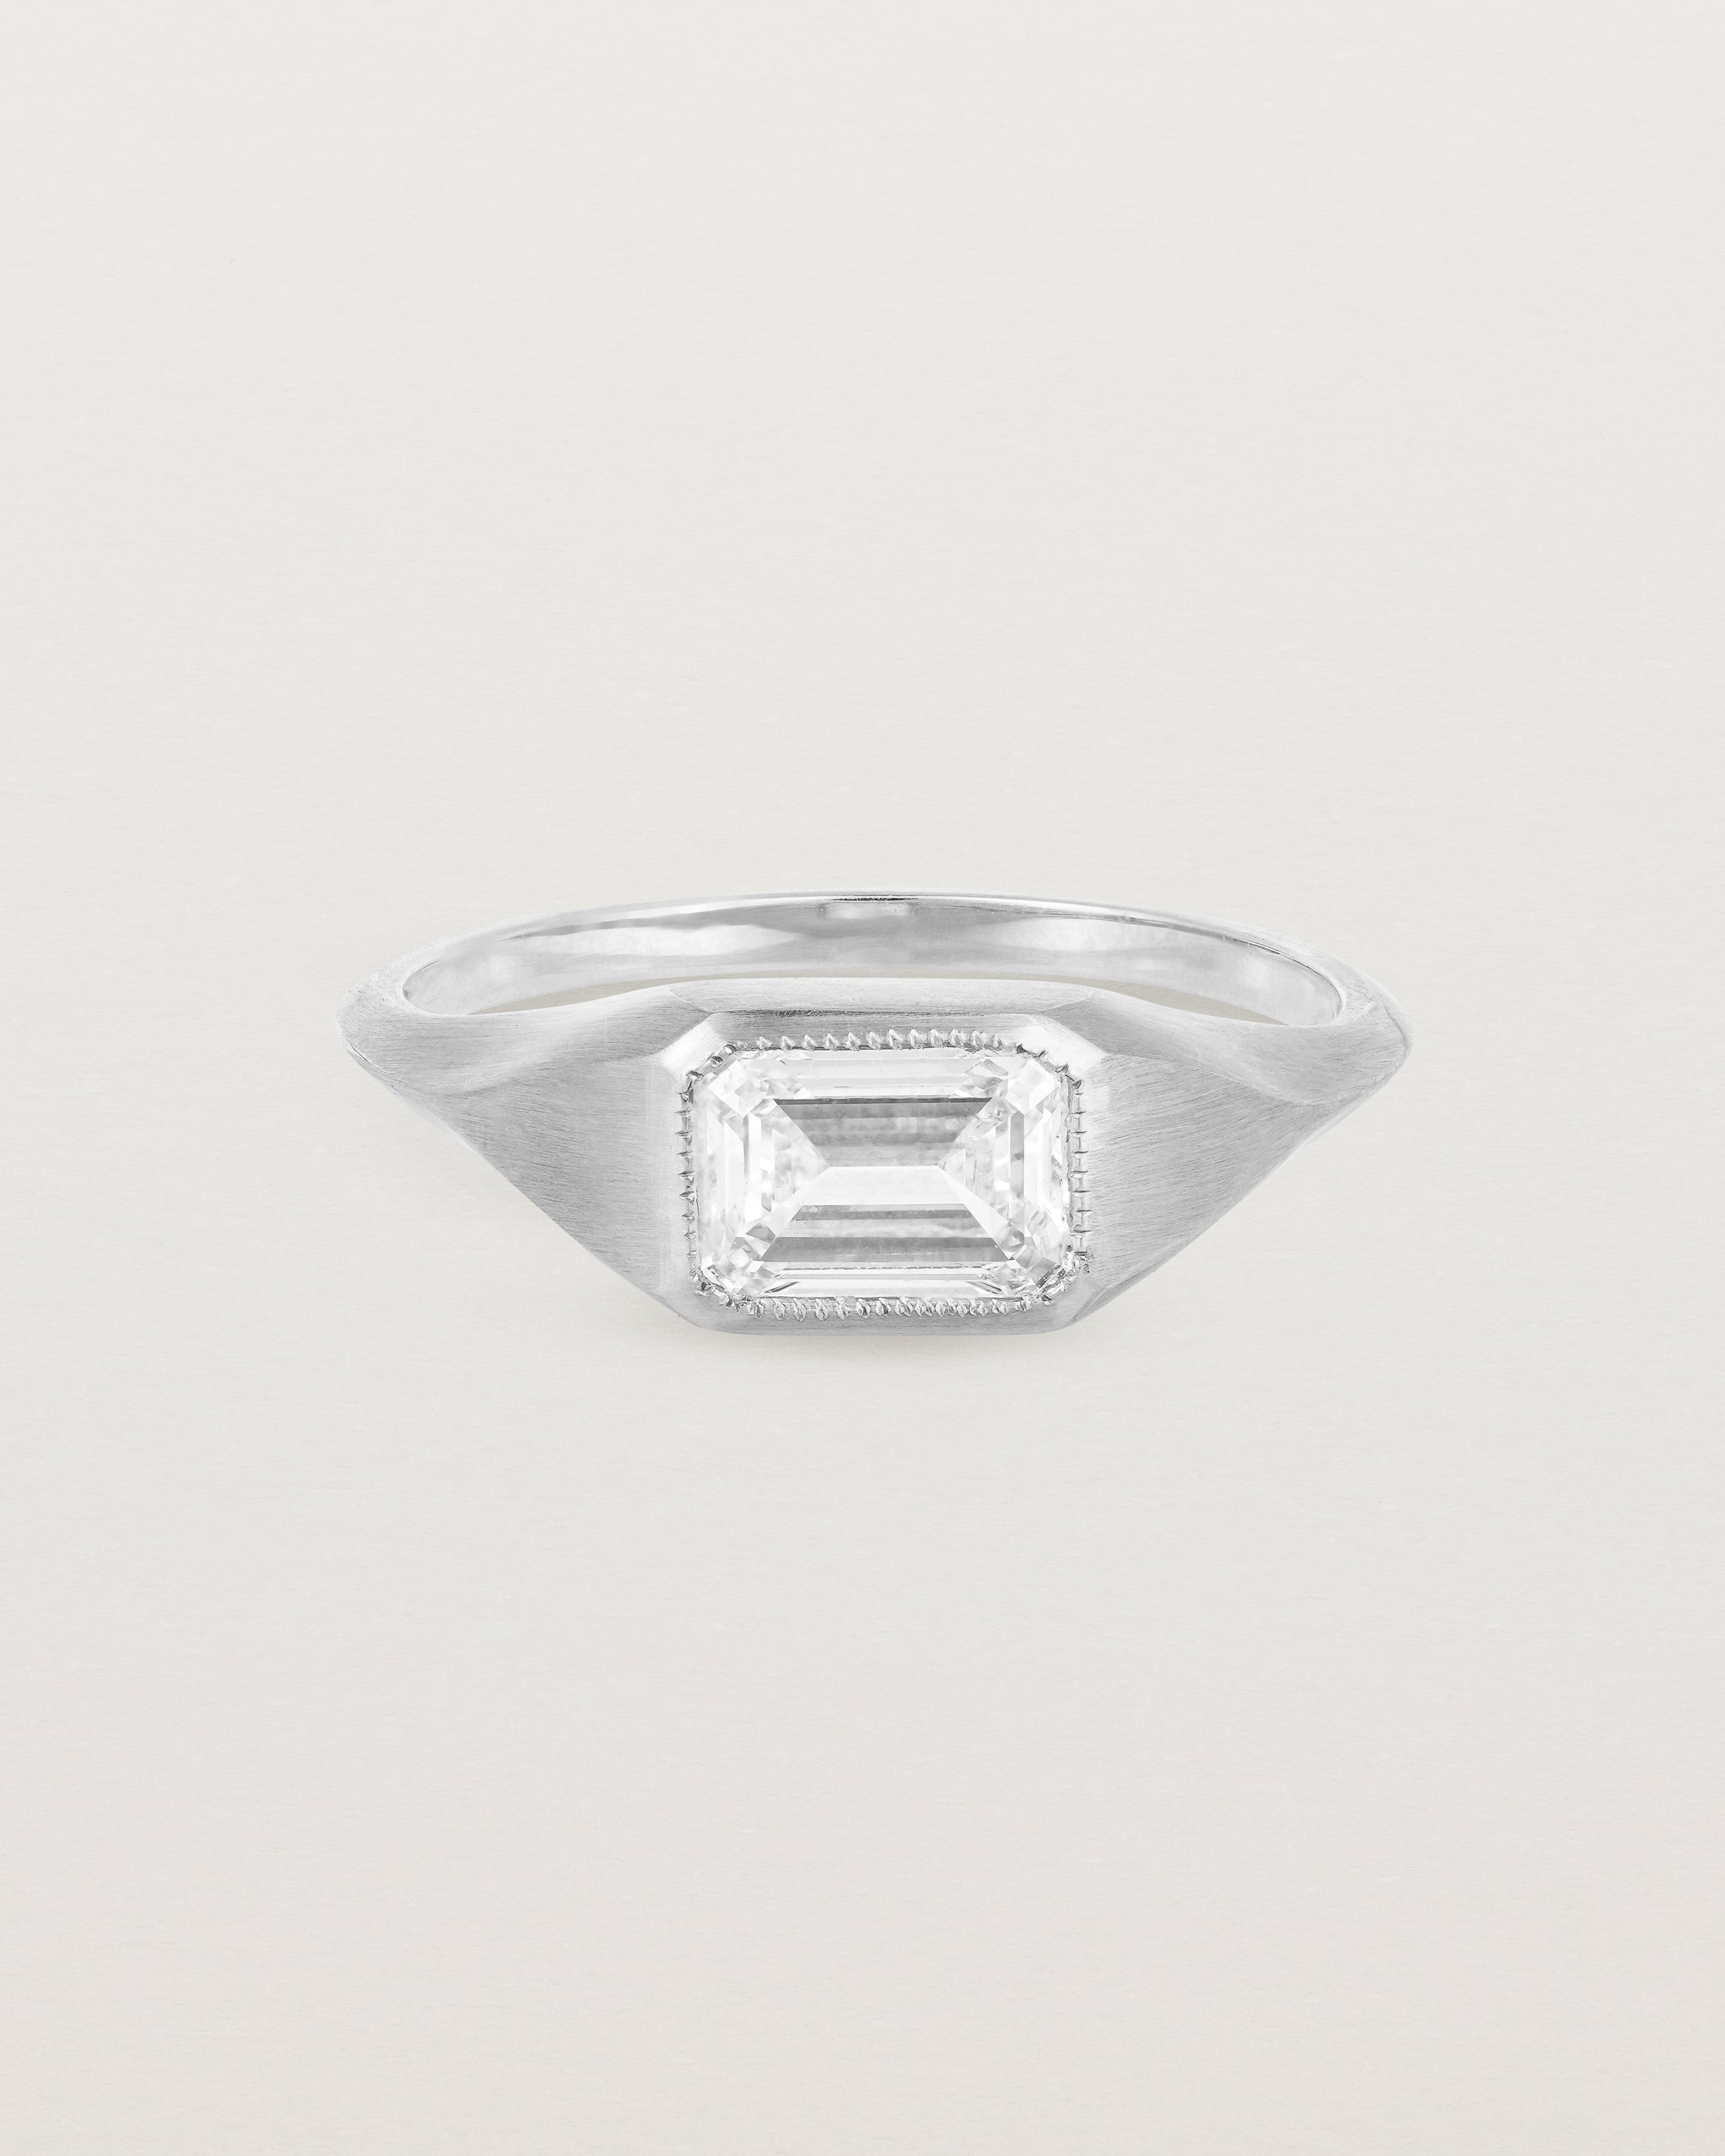 A white gold Signet Ring featuring a emerald cut white diamond